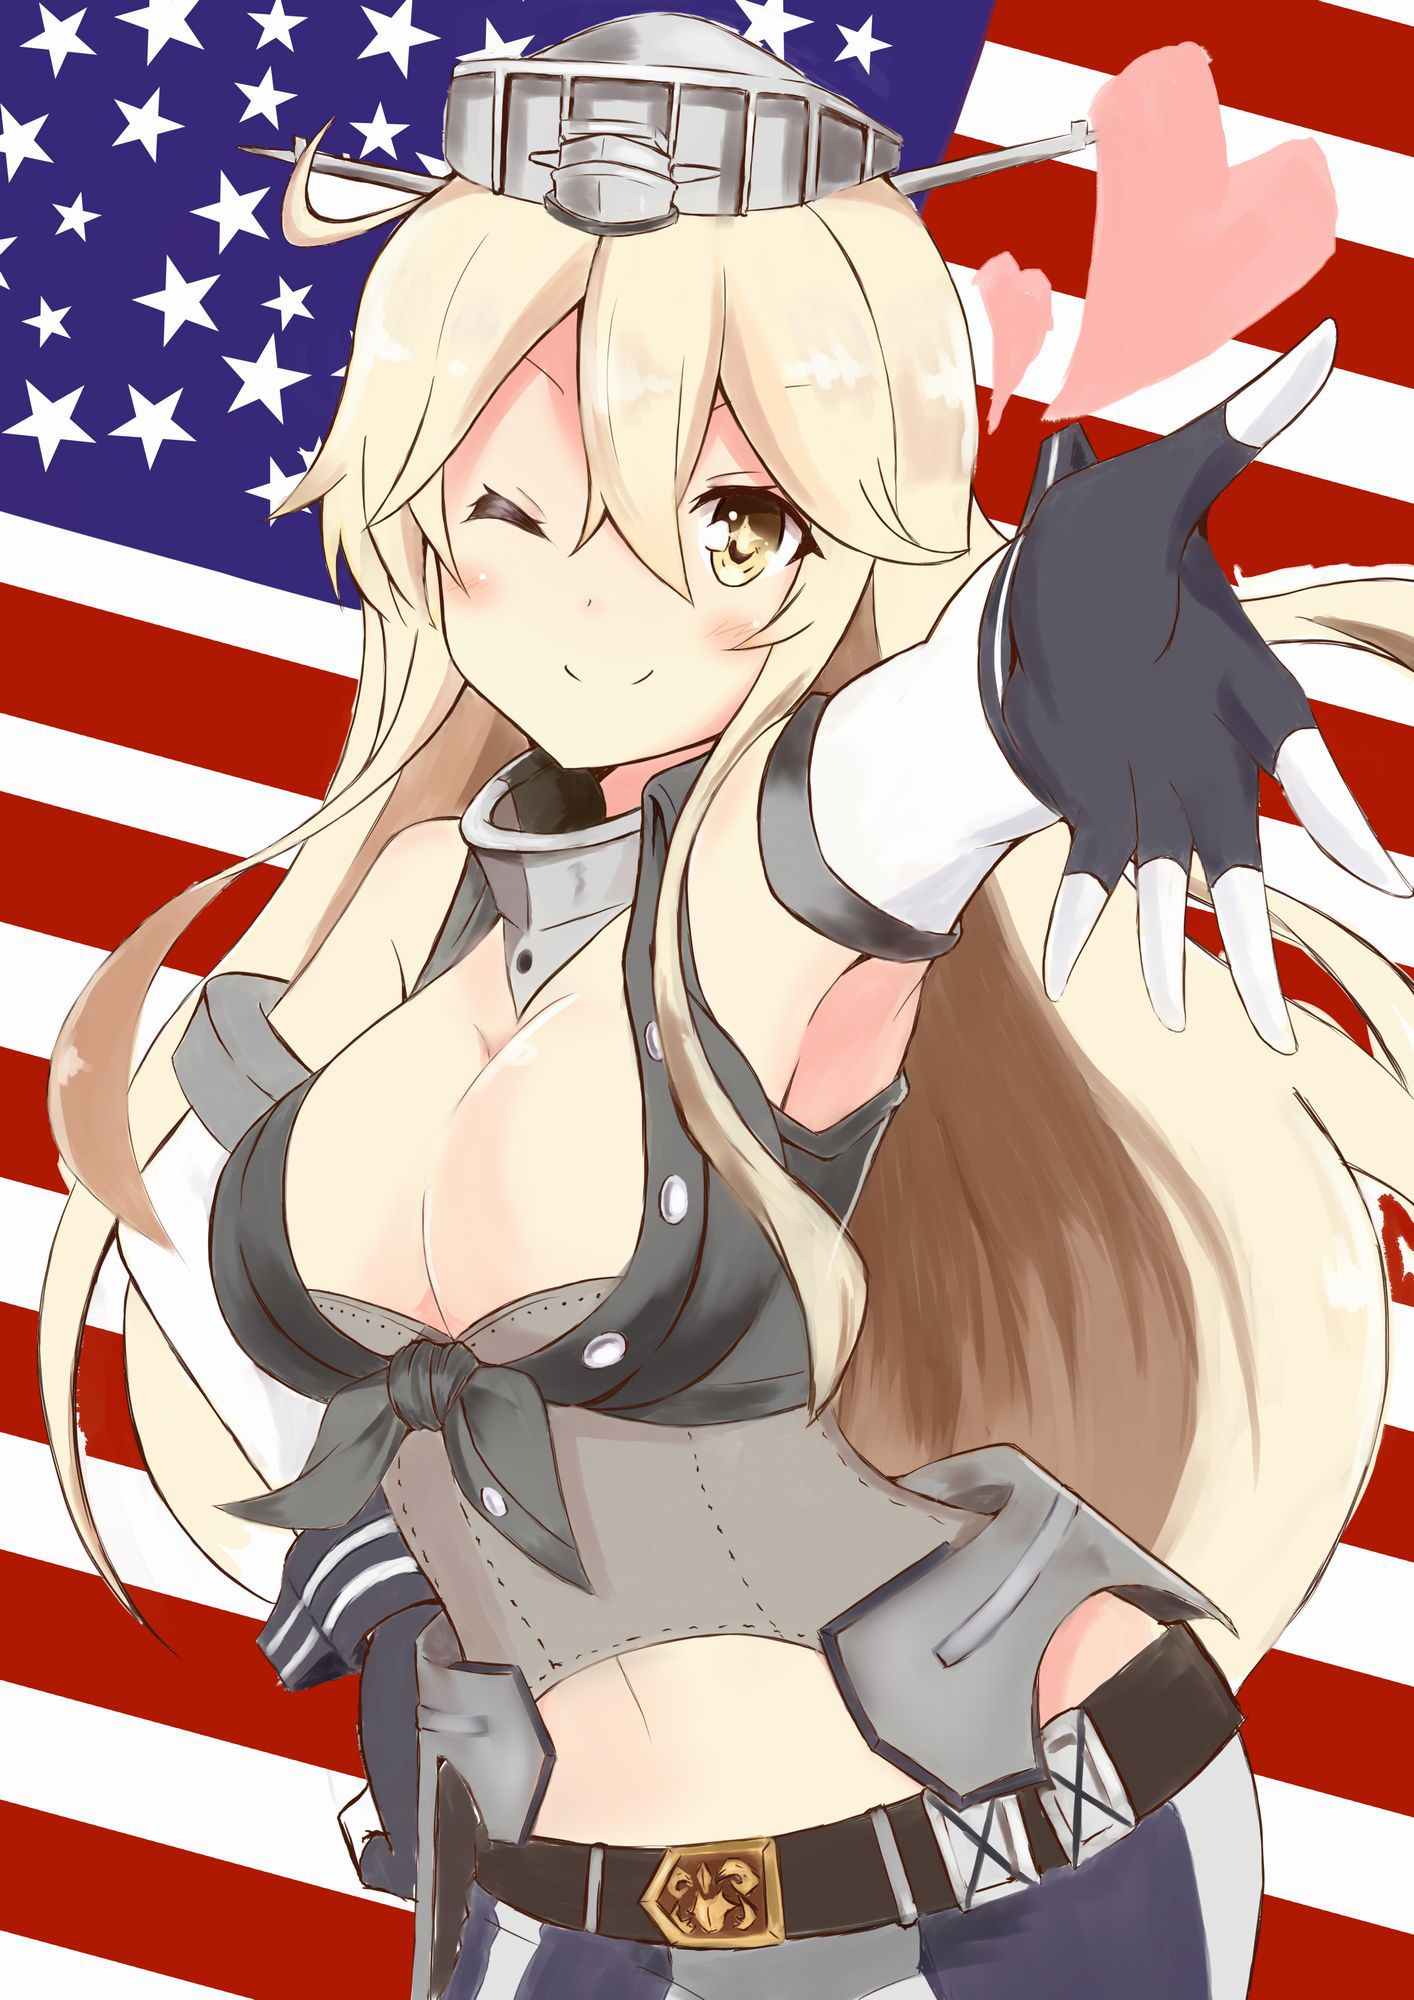 [Second / ZIP] USA! USA! Piow Chanko and ship it together images of Iowa 32